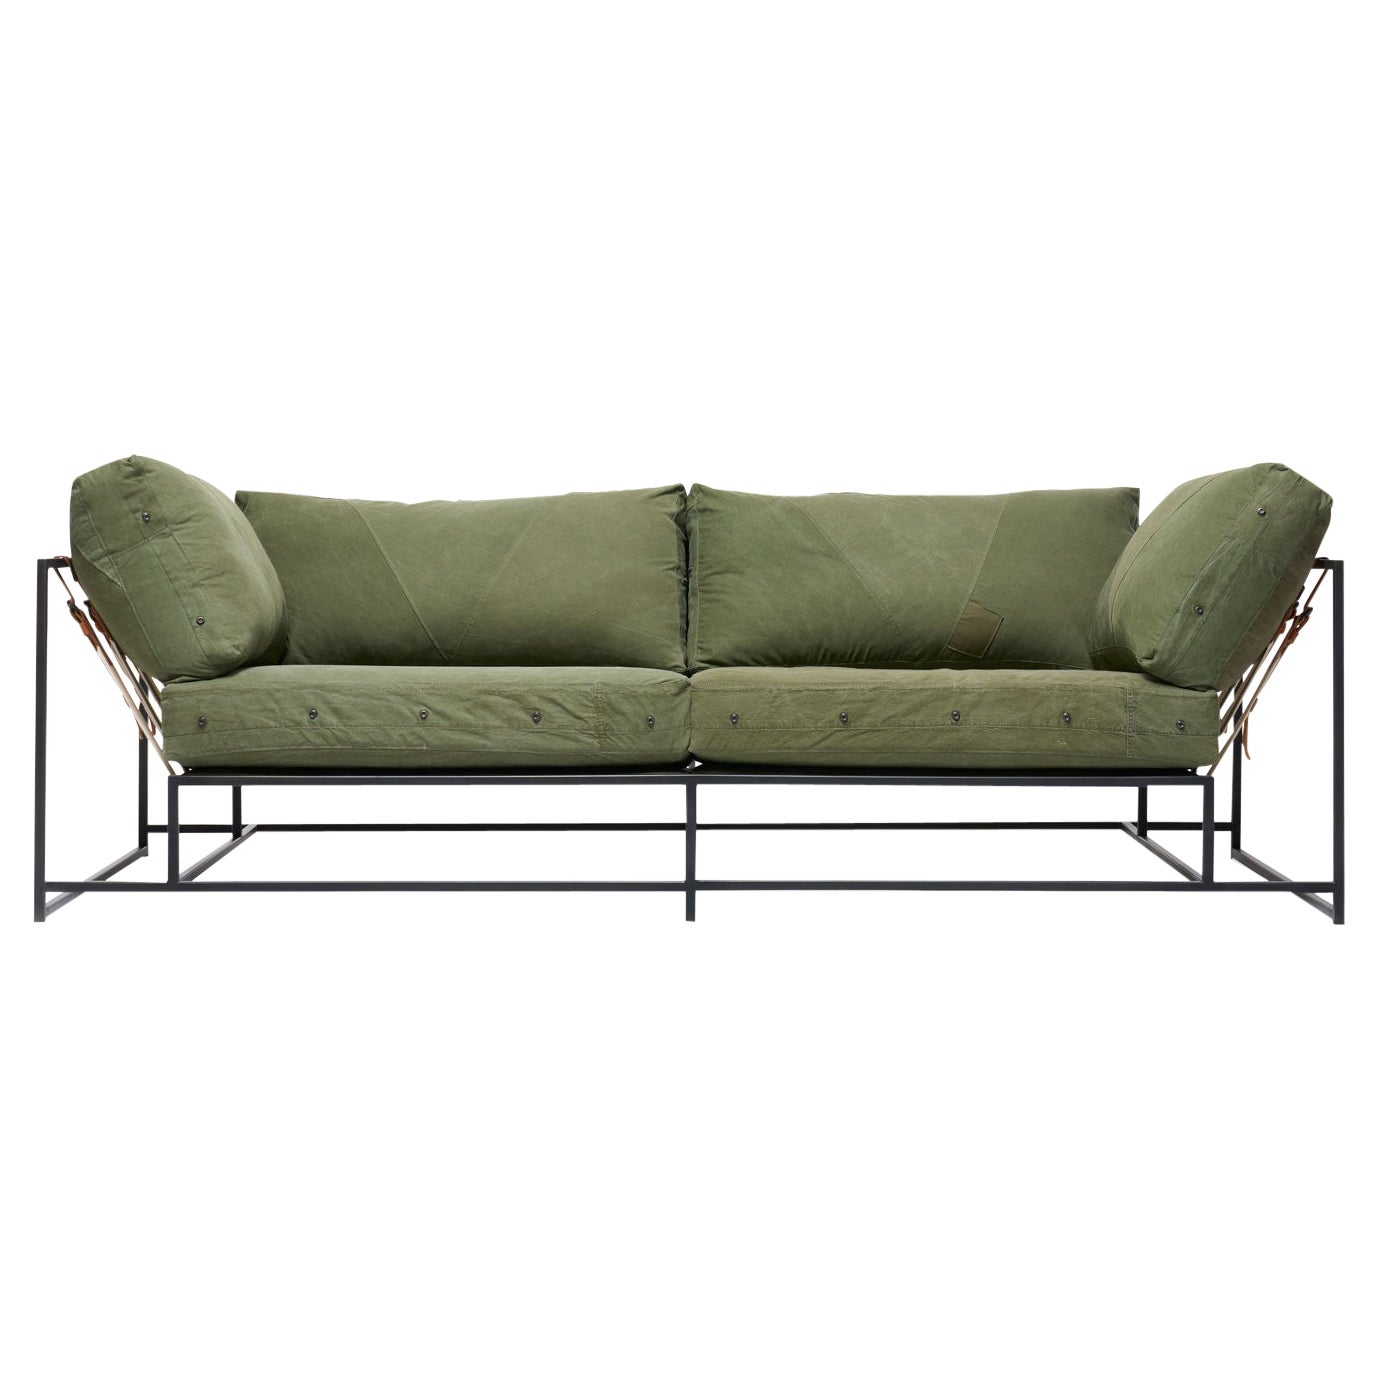 Vintage Military Canvas and Blackened Steel Two-Seat Sofa